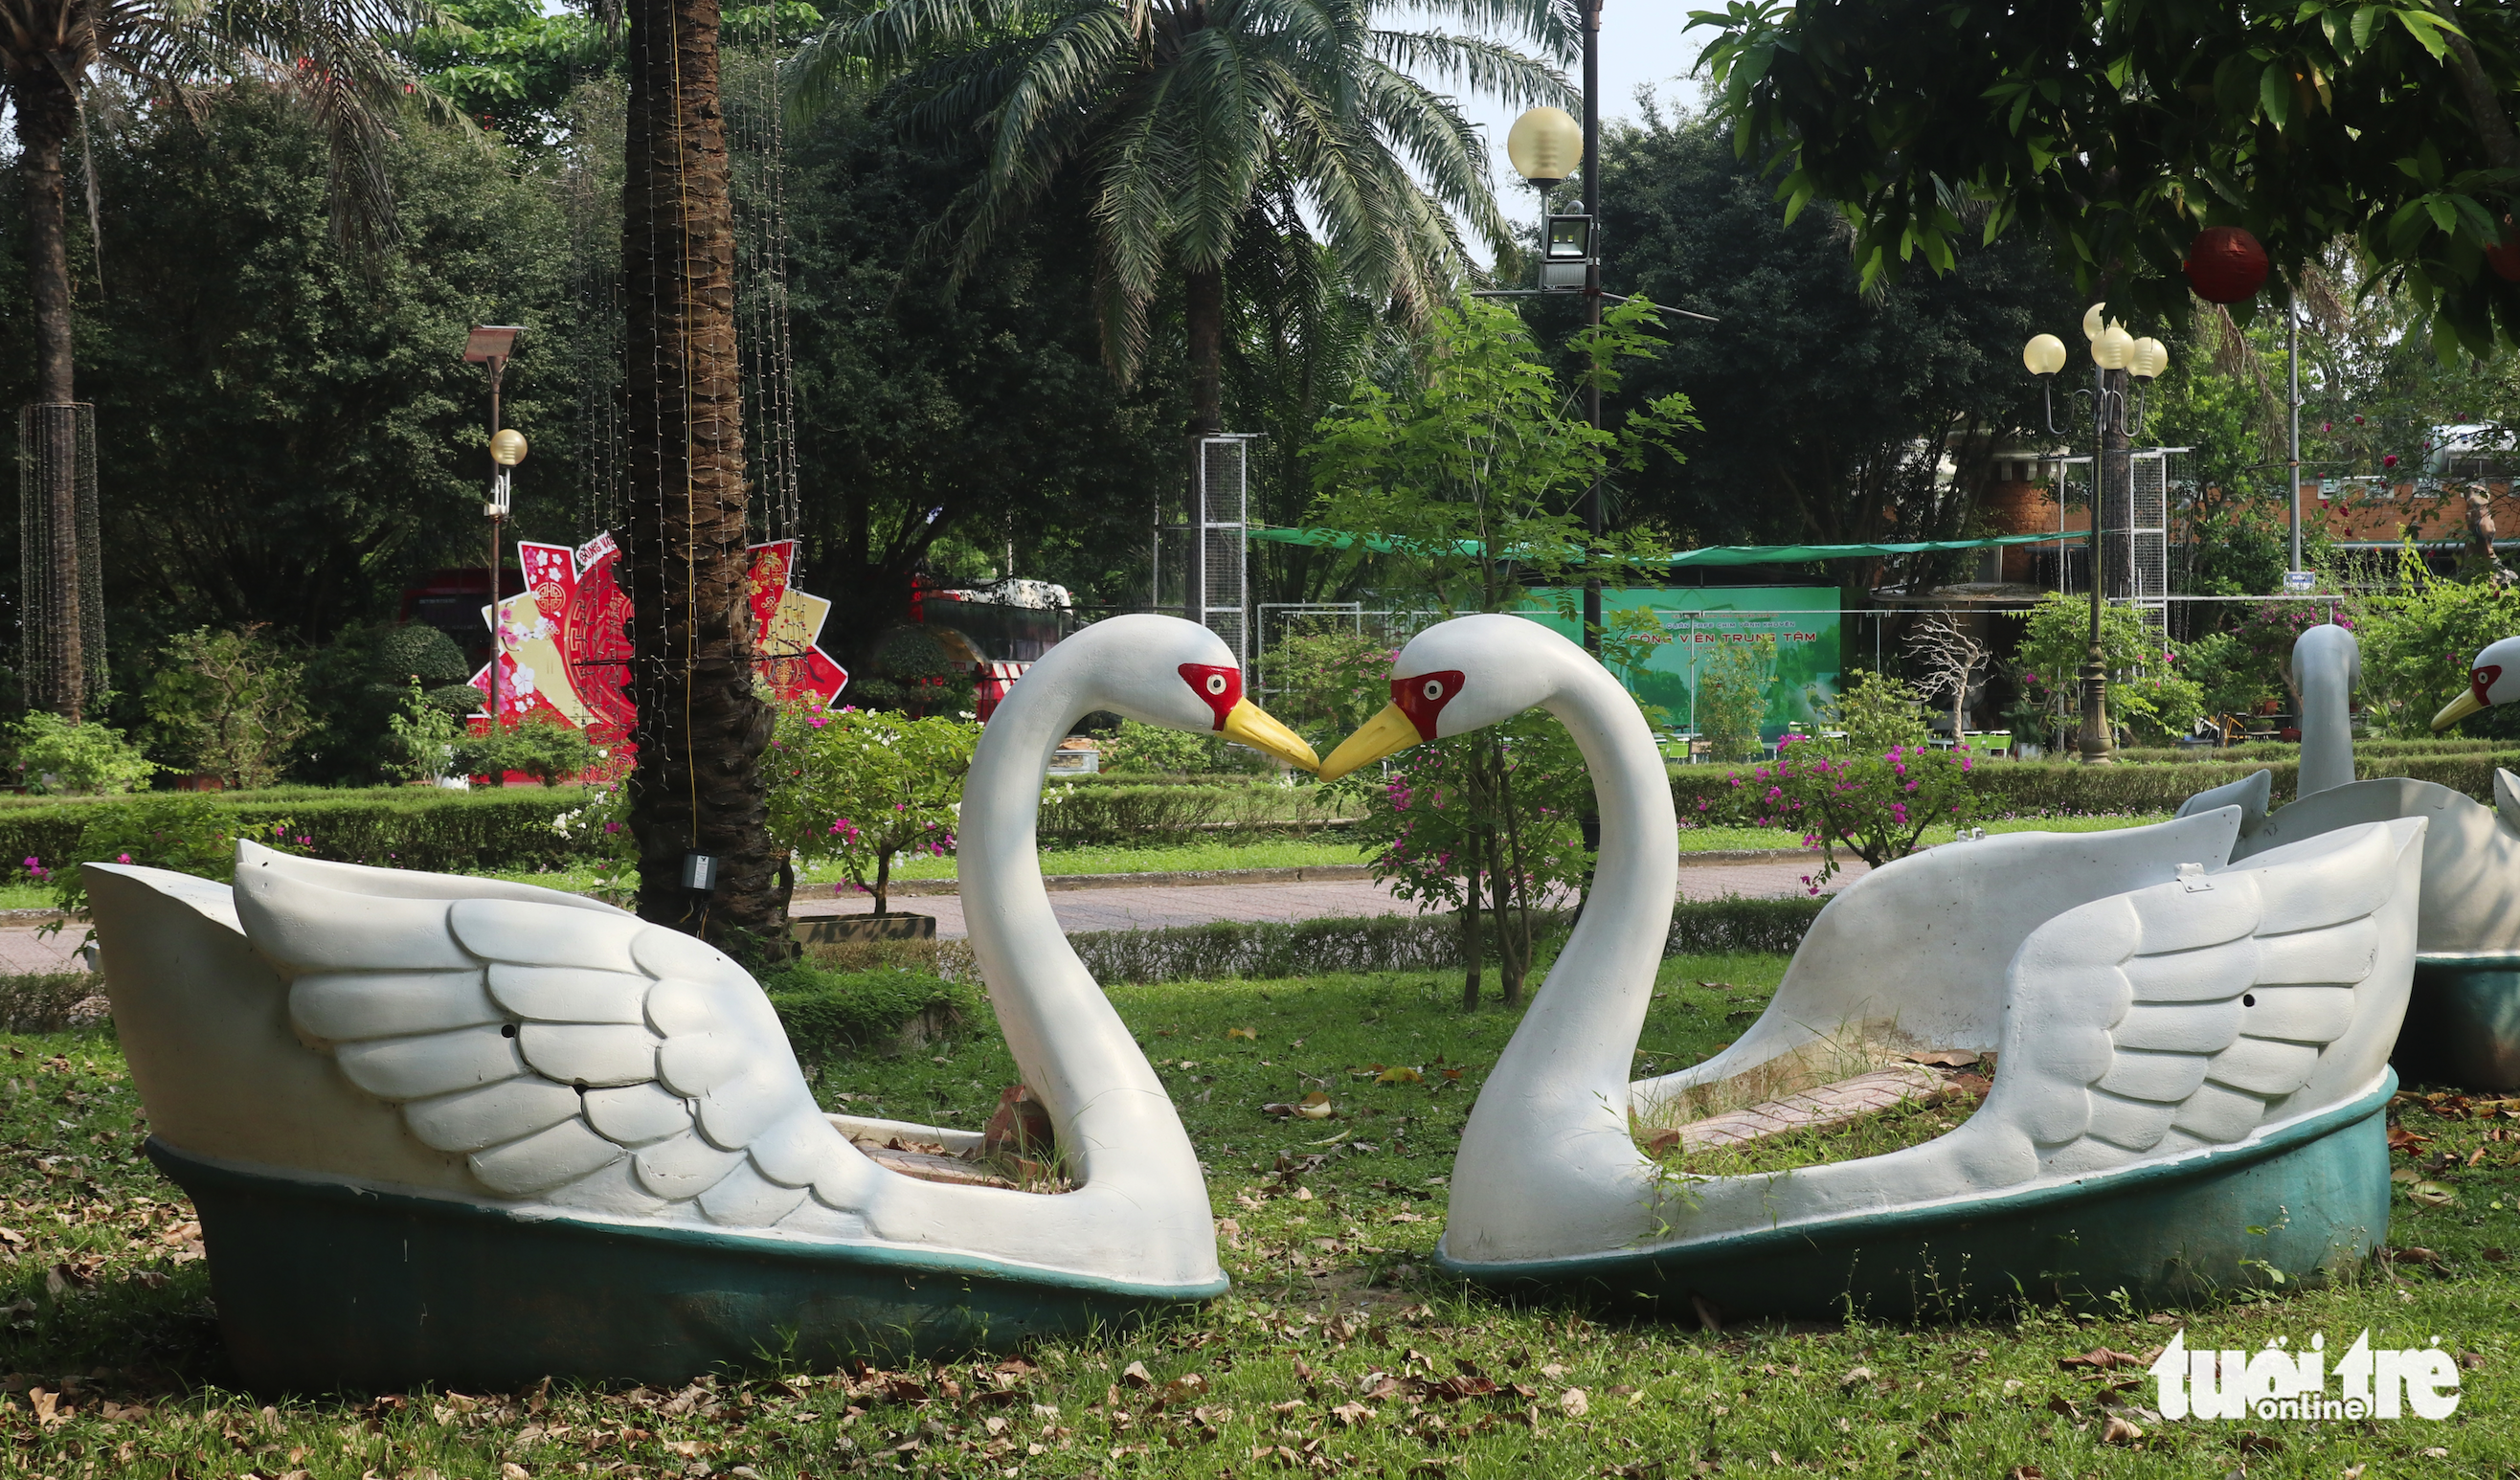 A deserted scene at the Vinh City central park in the heart of Vinh City in Nghe An Province, Vietnam. Photo: Doan Hoa / Tuoi Tre